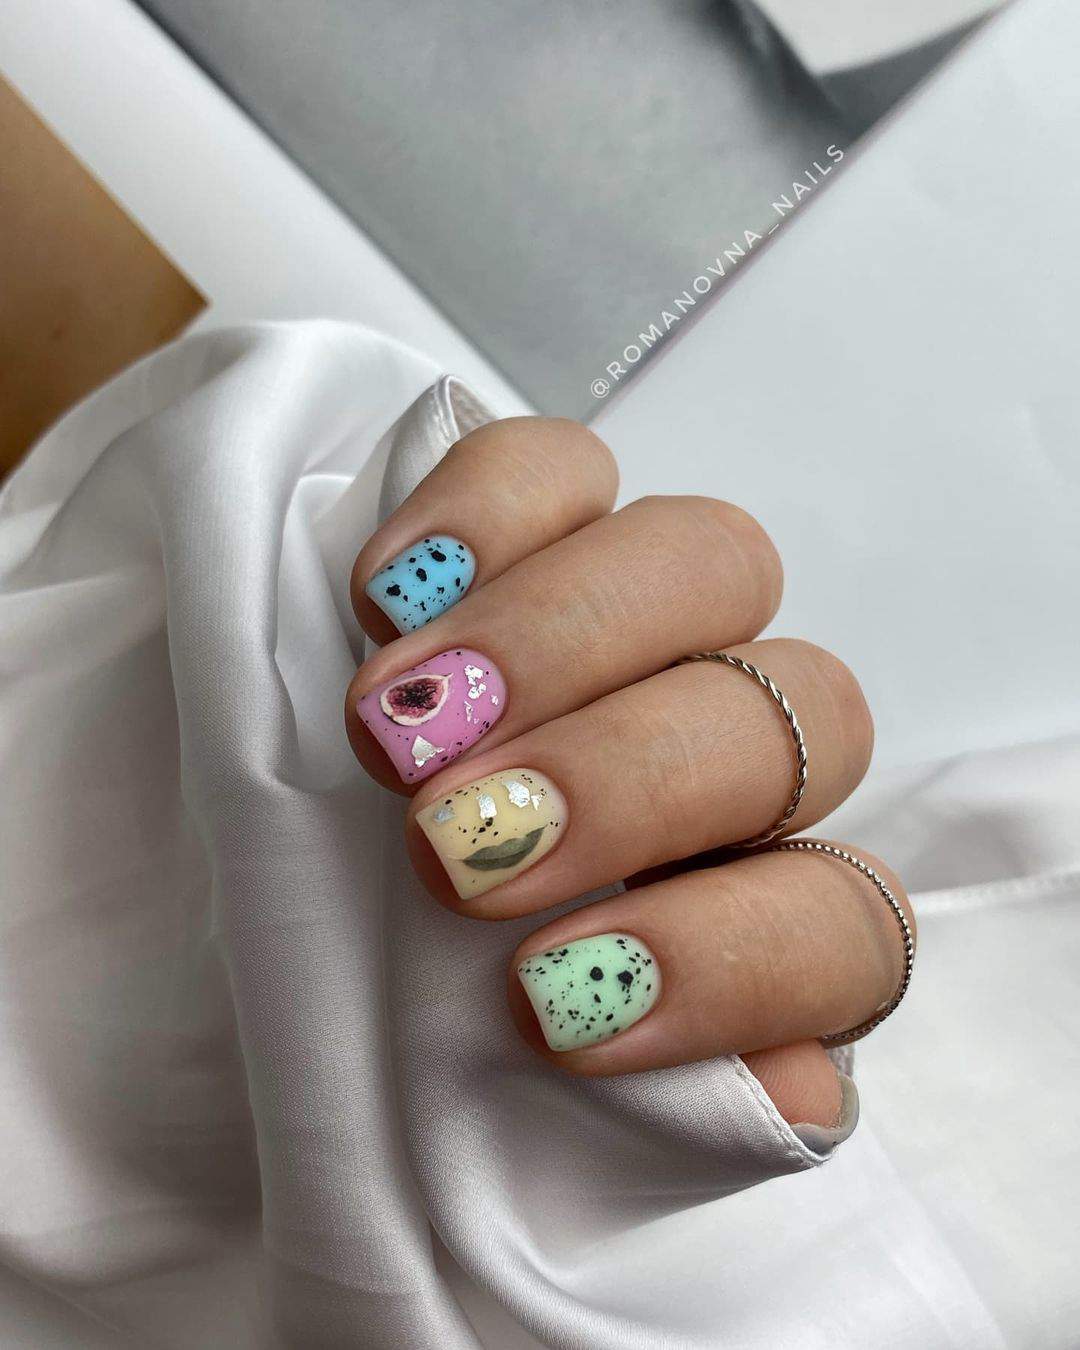 20 Cute Fall Nail Designs To Try In 2021 images 4